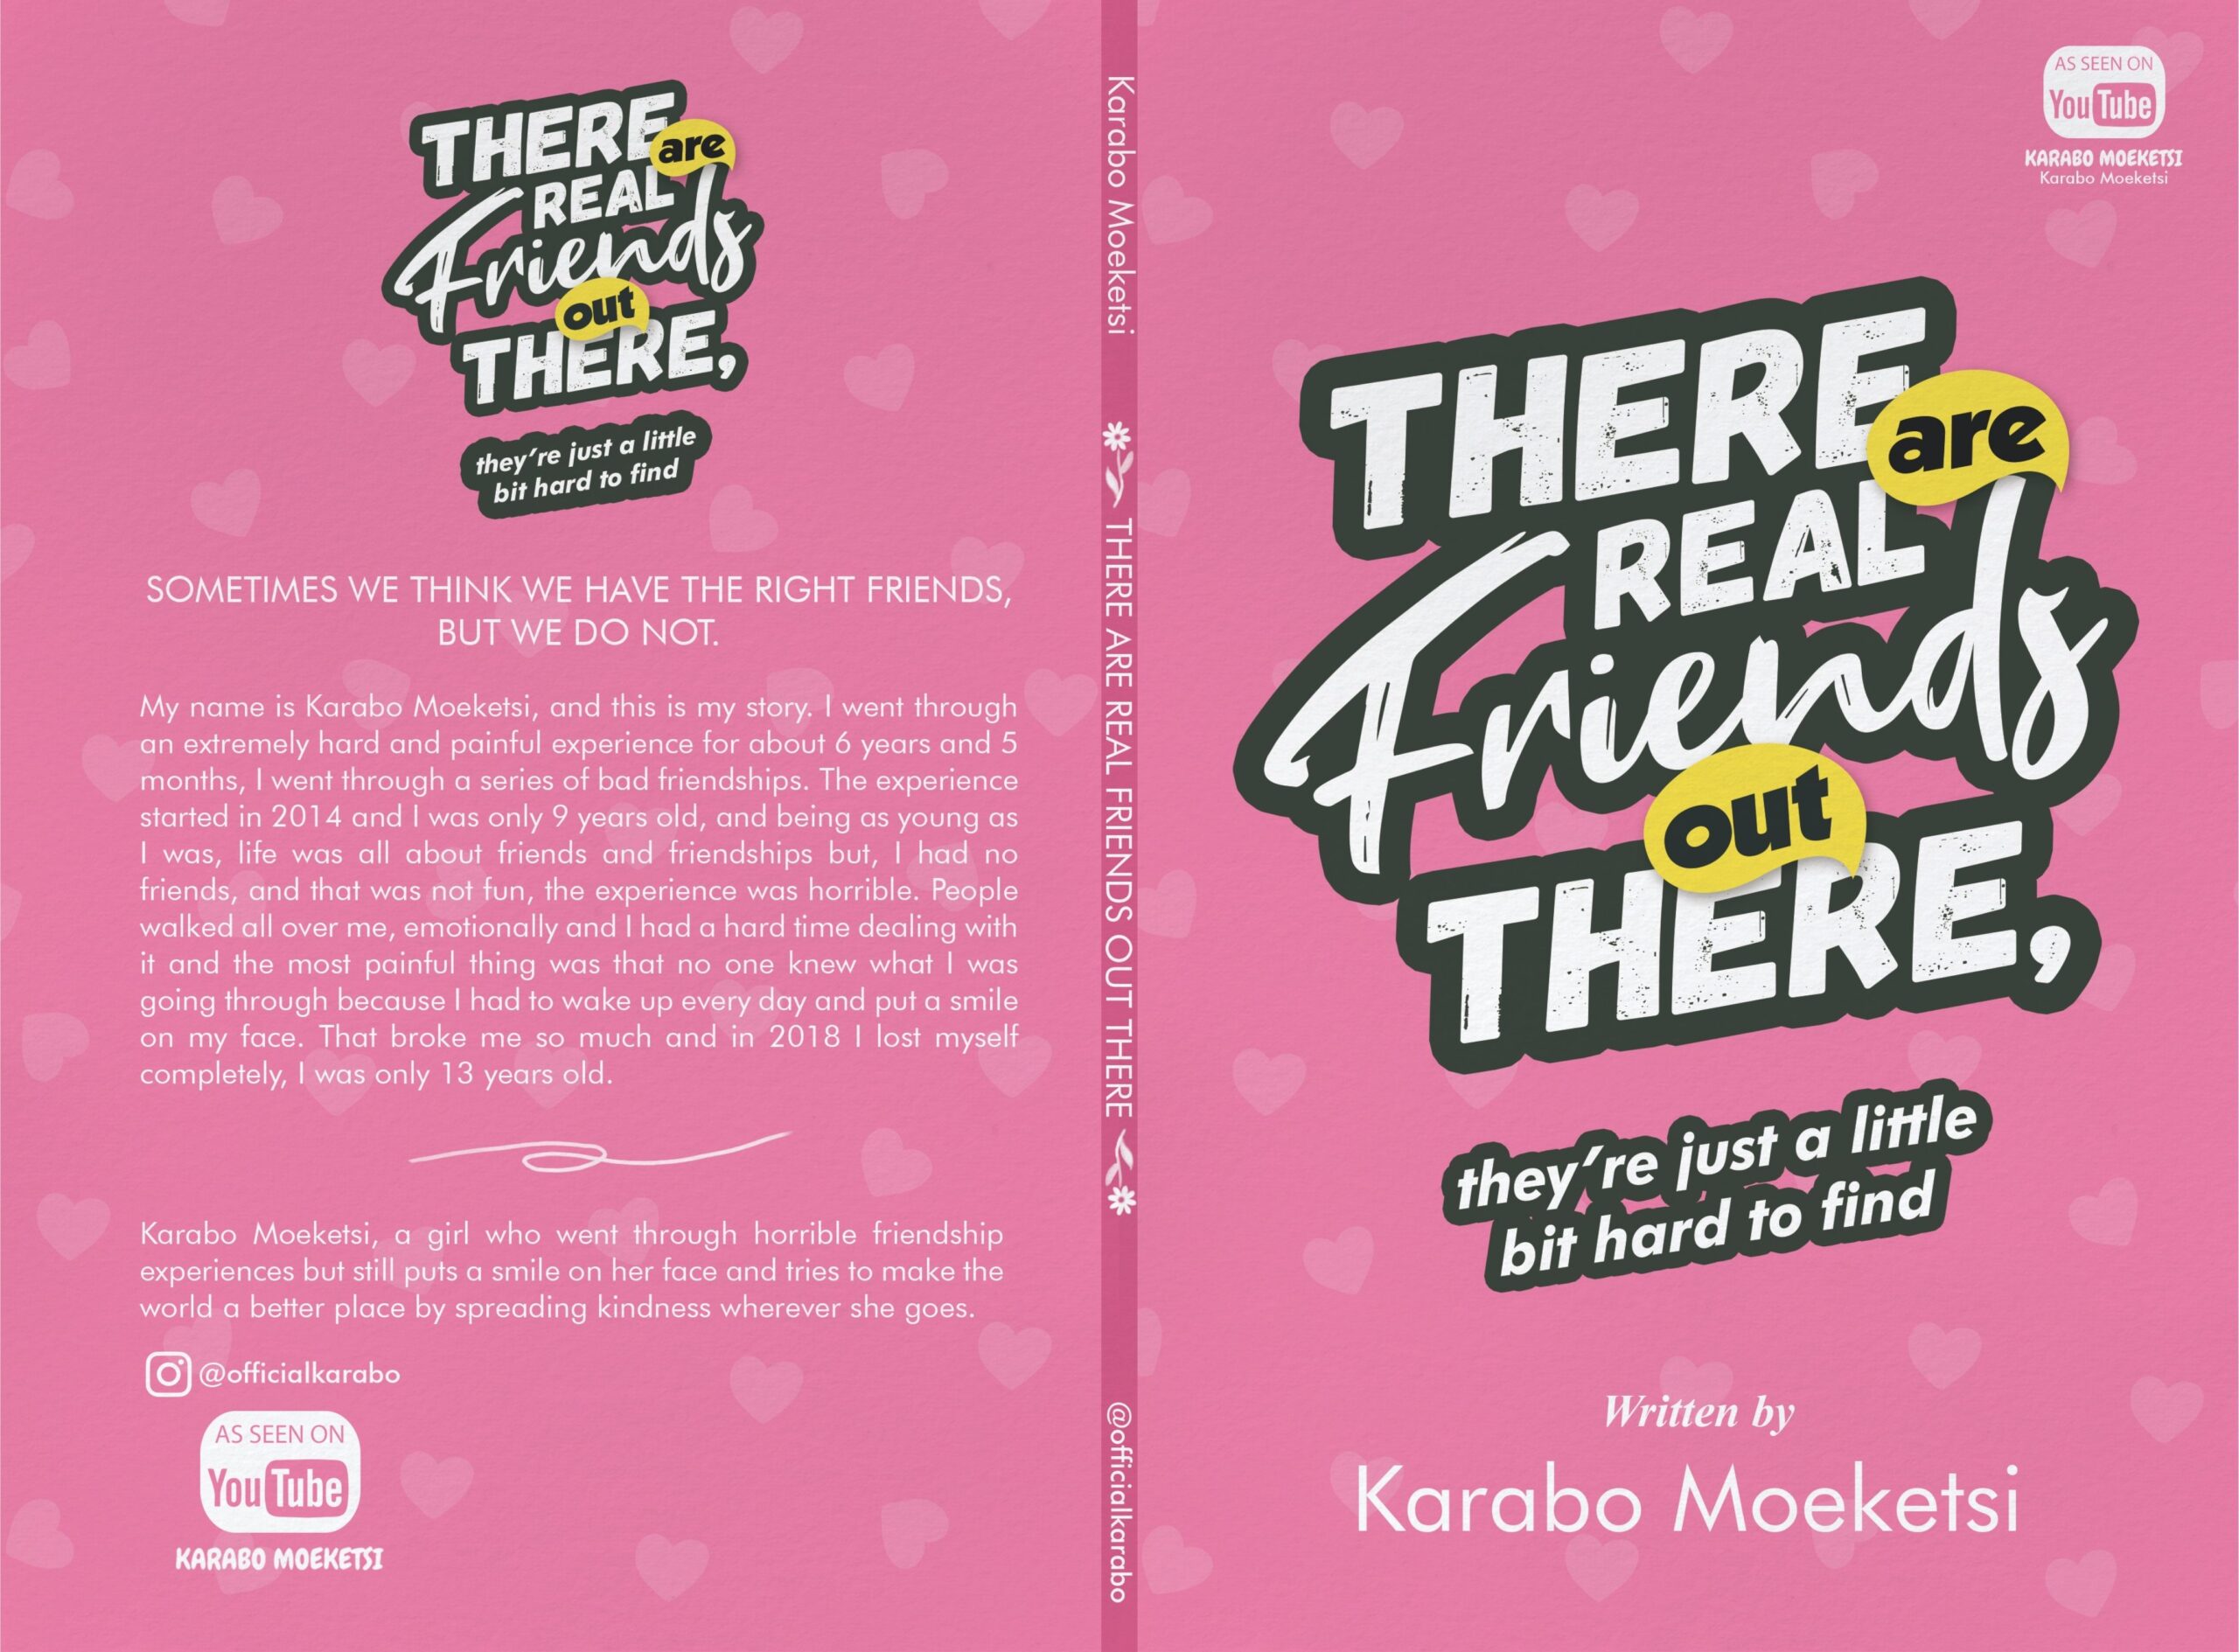 FREE: There are real friends out there,: they’re just a little bit hard to find by Karabo Moeketsi